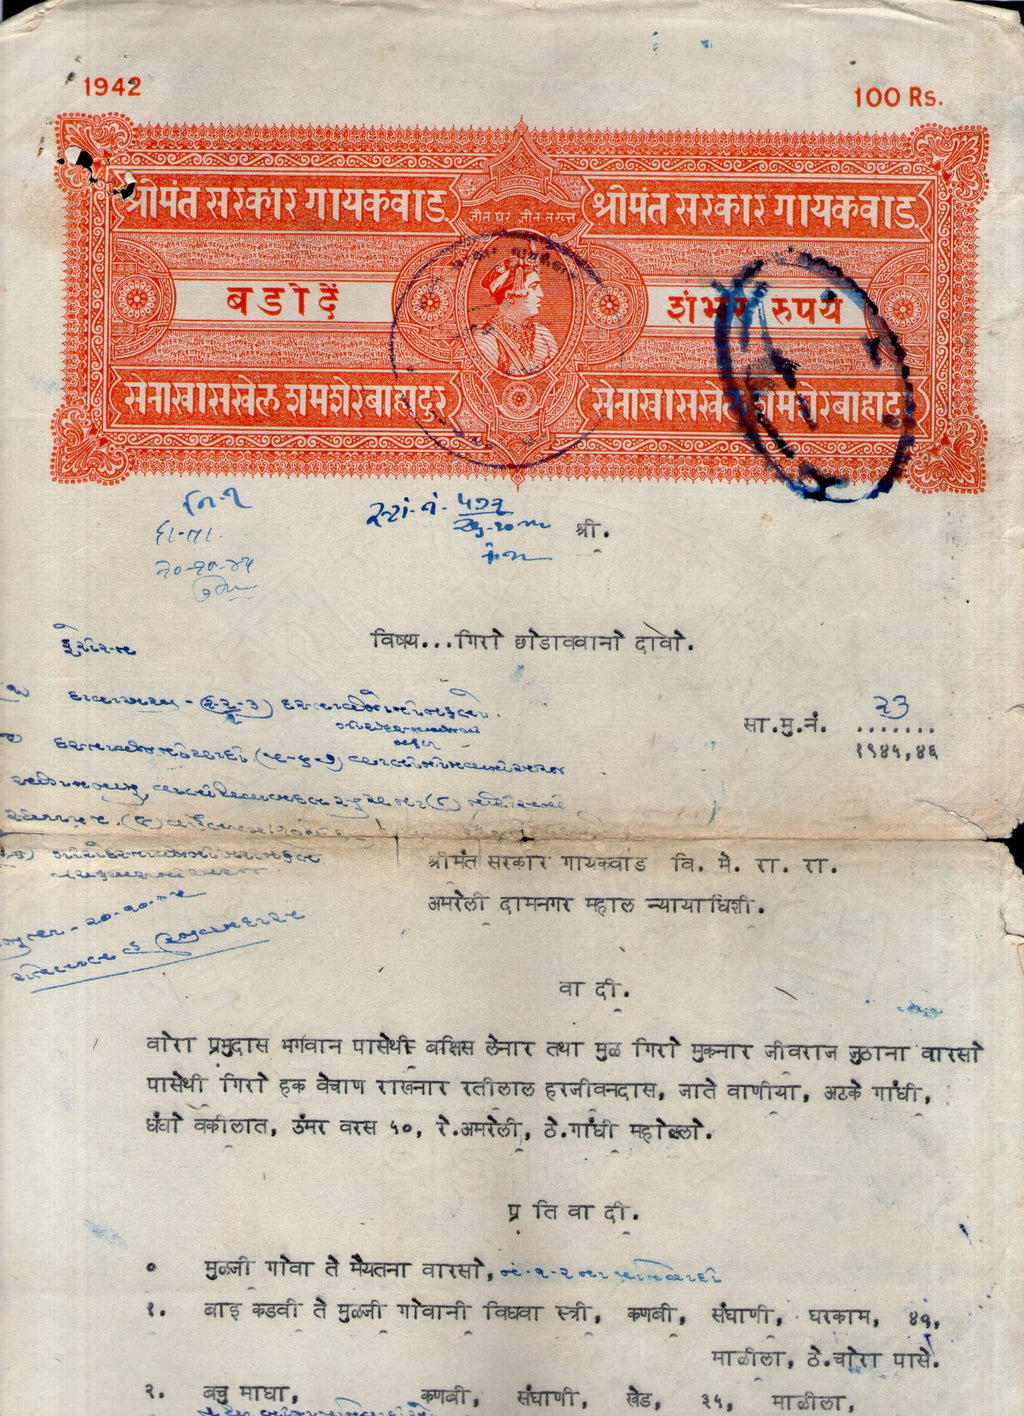 India Fiscal Baroda State 100 Rs Stamp Paper T50 KM539 Revenue Court Fee # 10293-15